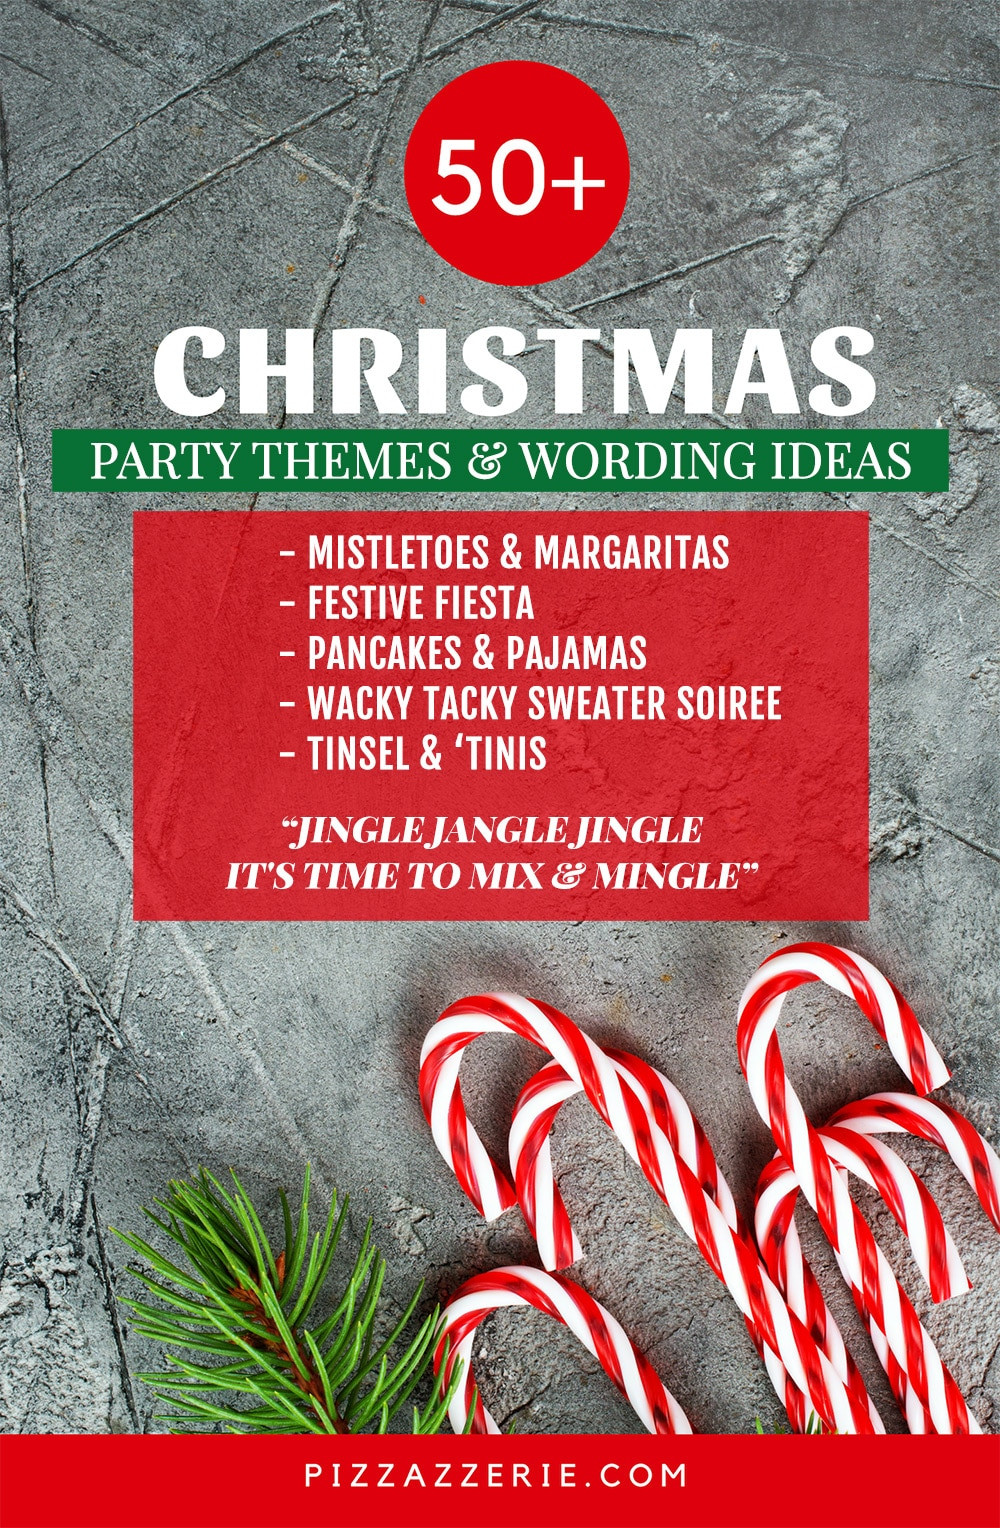 Holiday Party Invitation Ideas
 50 CHRISTMAS PARTY THEMES & CLEVER INVITATION WORDING